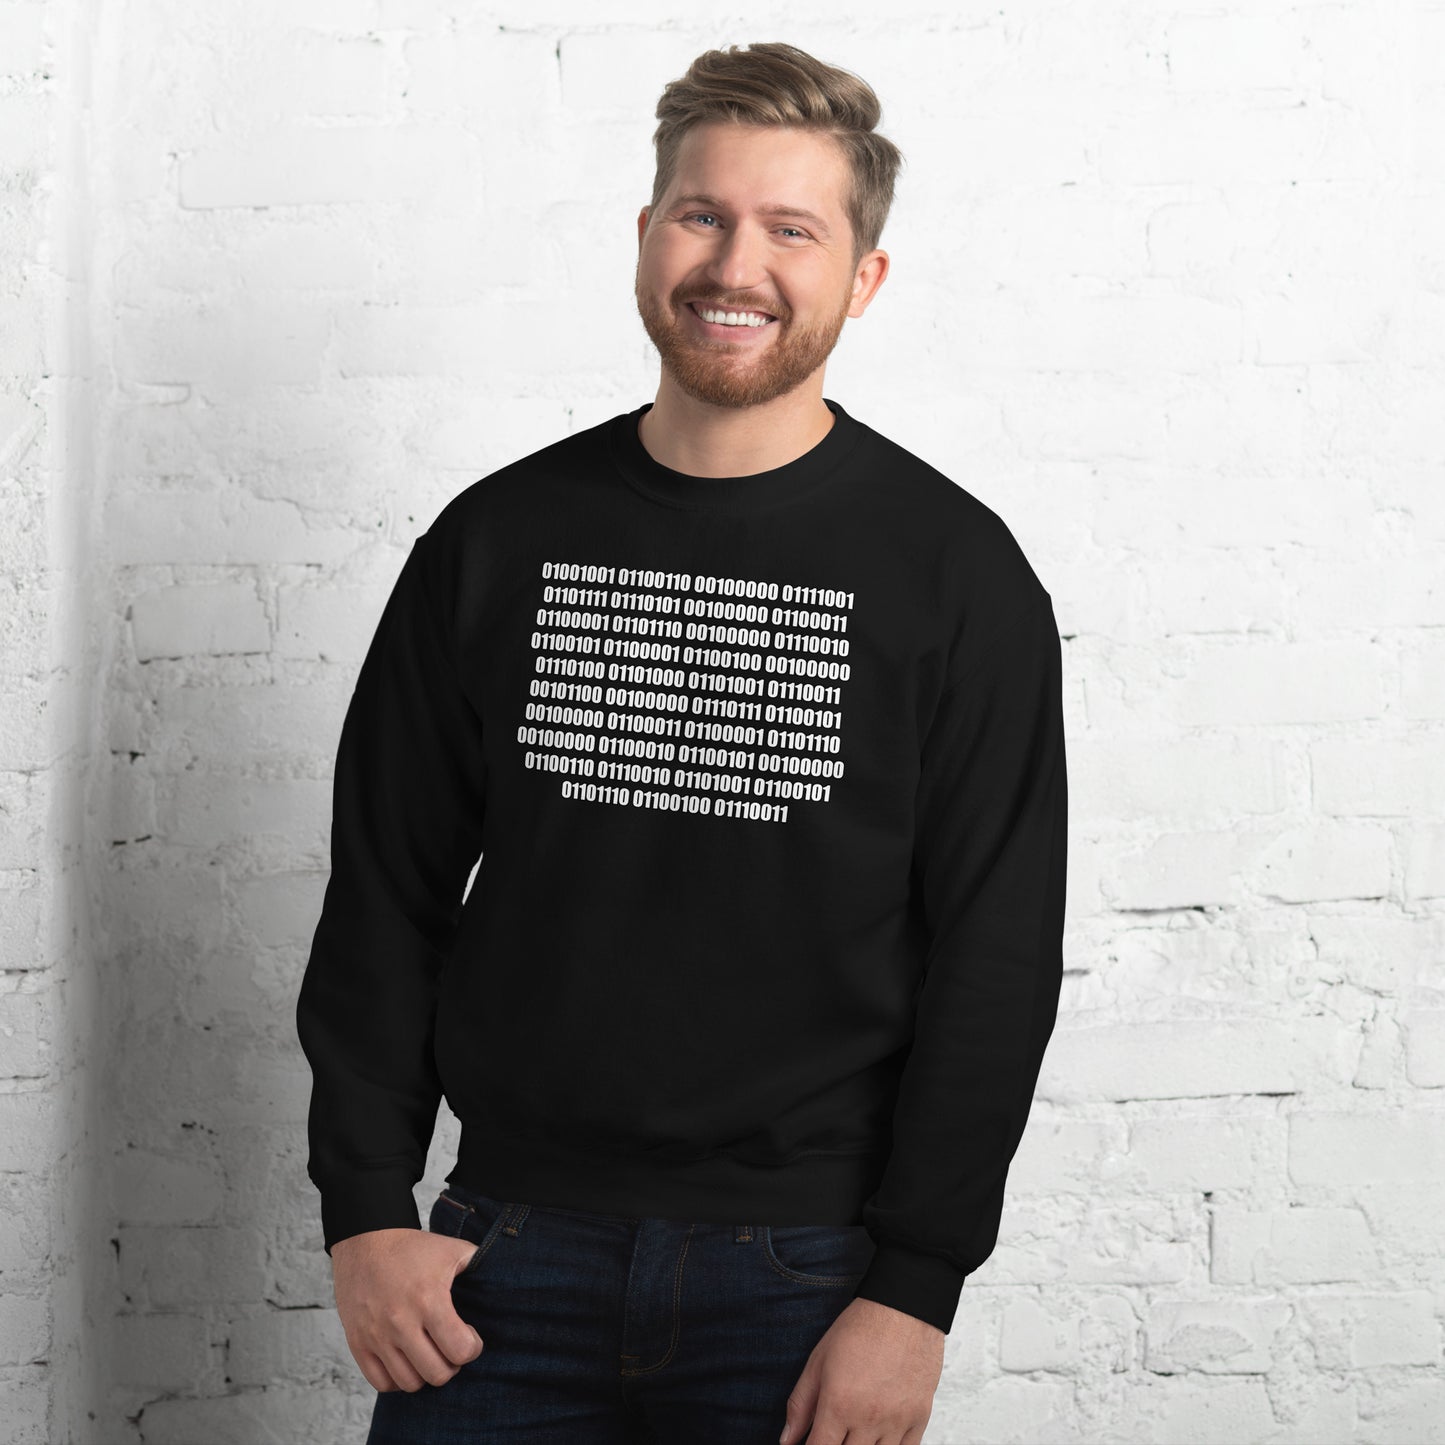 Men with black sweatshirt with binaire text "If you can read this"